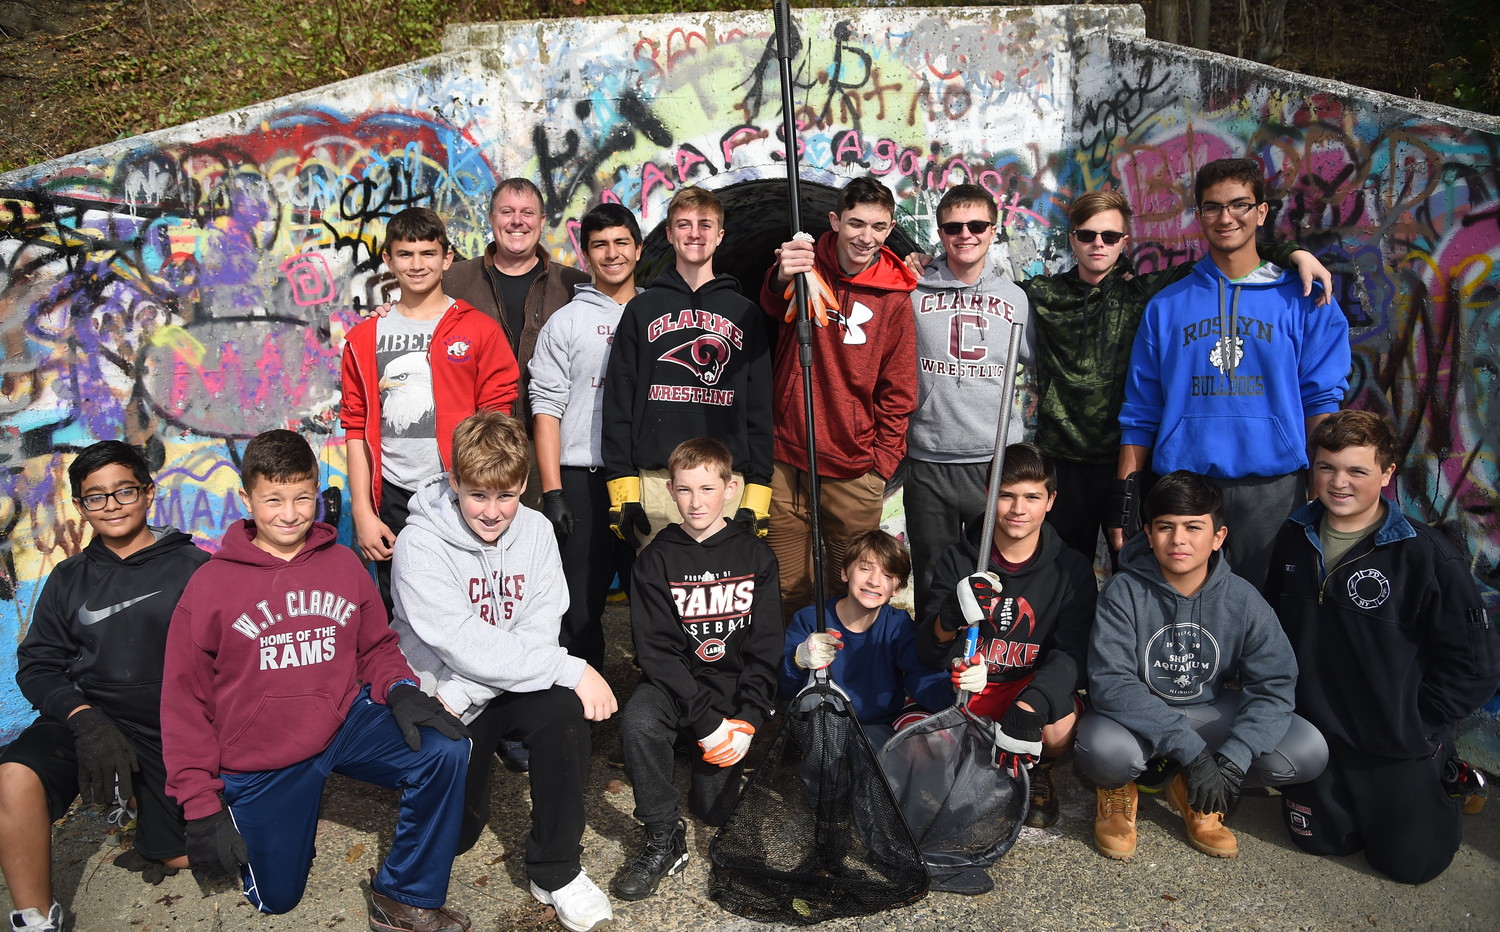 Members of Boy Scouts Troop 469 gathered on Nov. 4 to clean up the bird sanctuary as part of the East Meadow Community Organizations’ semi-annual bird sanctuary cleanup.